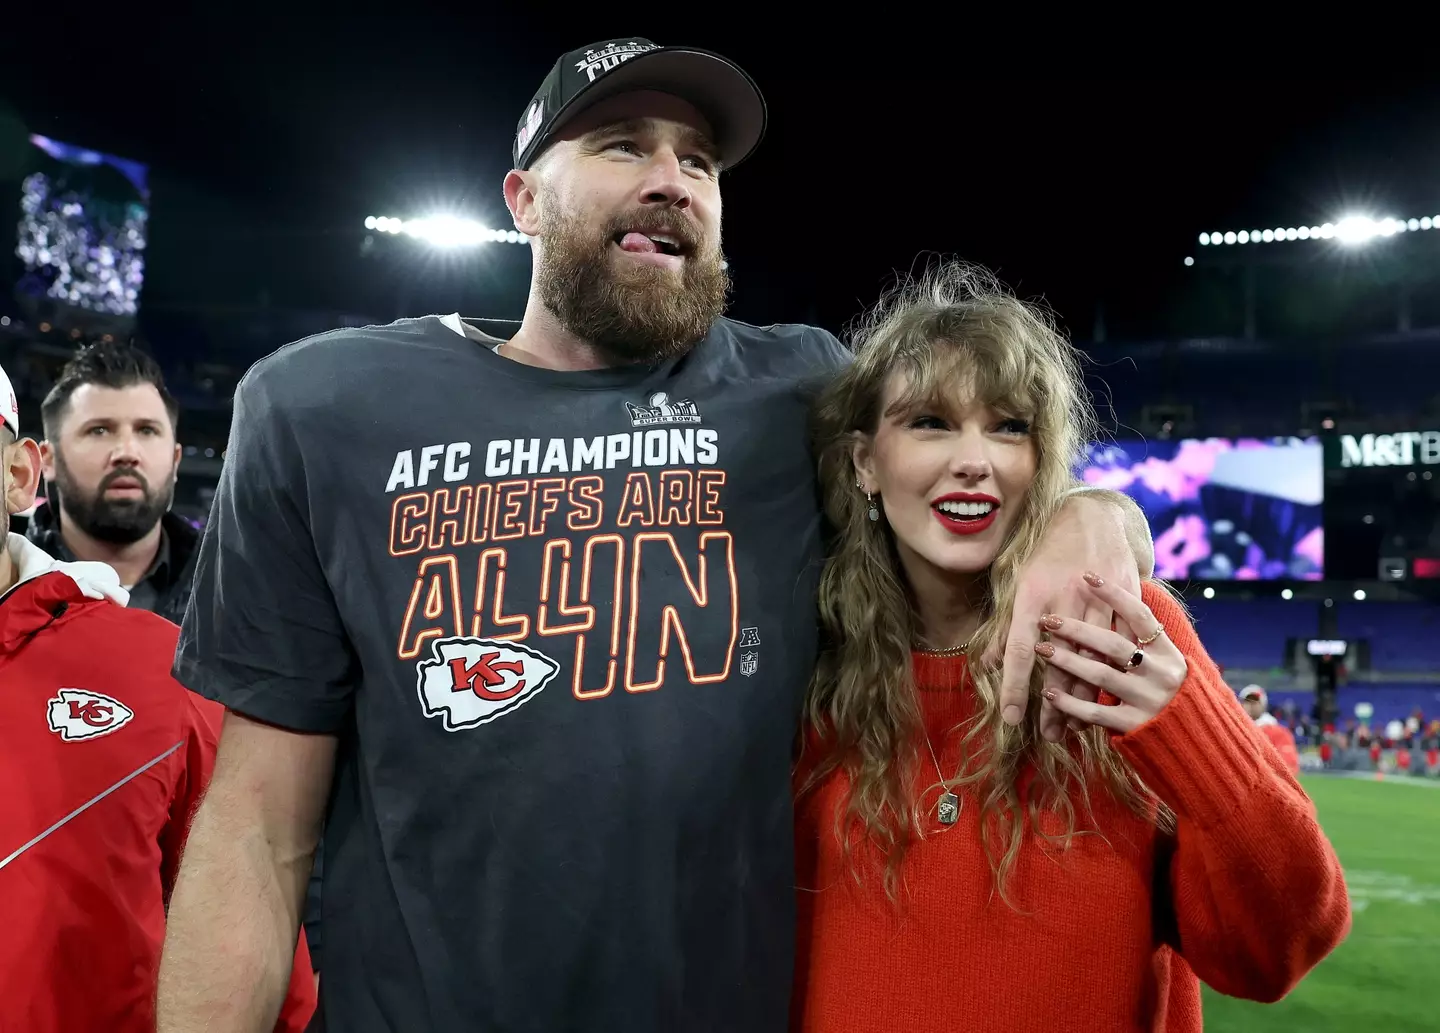 Taylor and Travis celebrating him getting to another Super Bowl.